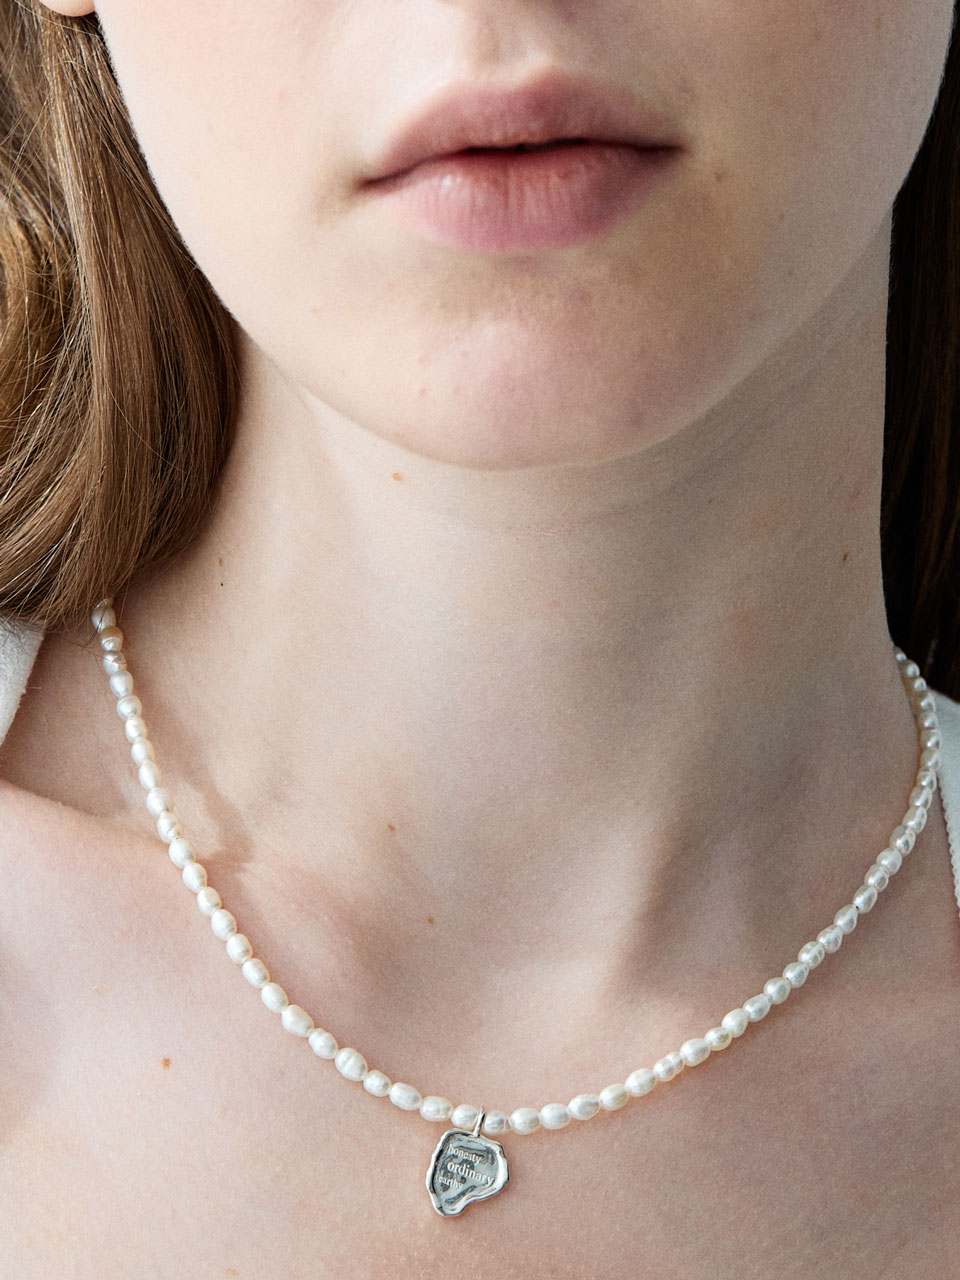 discliche melting pearl necklace